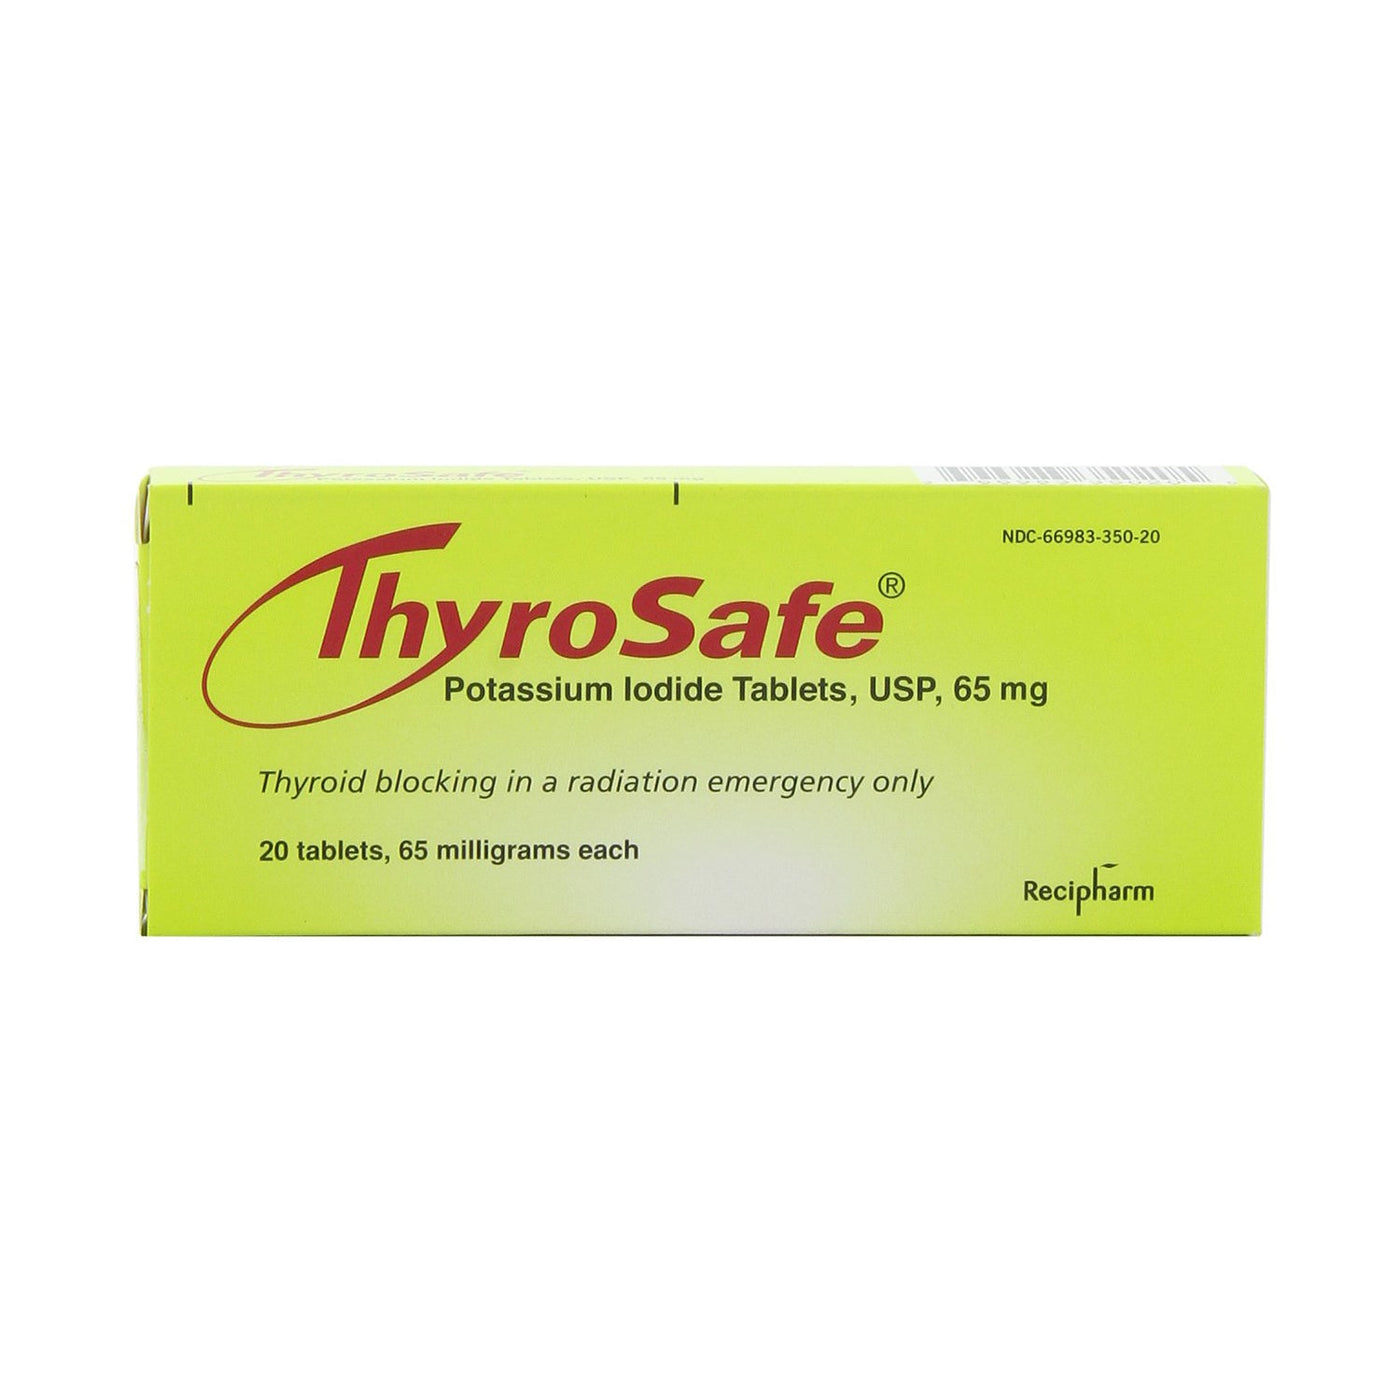 Thyrosafe potassium iodide packaging front view